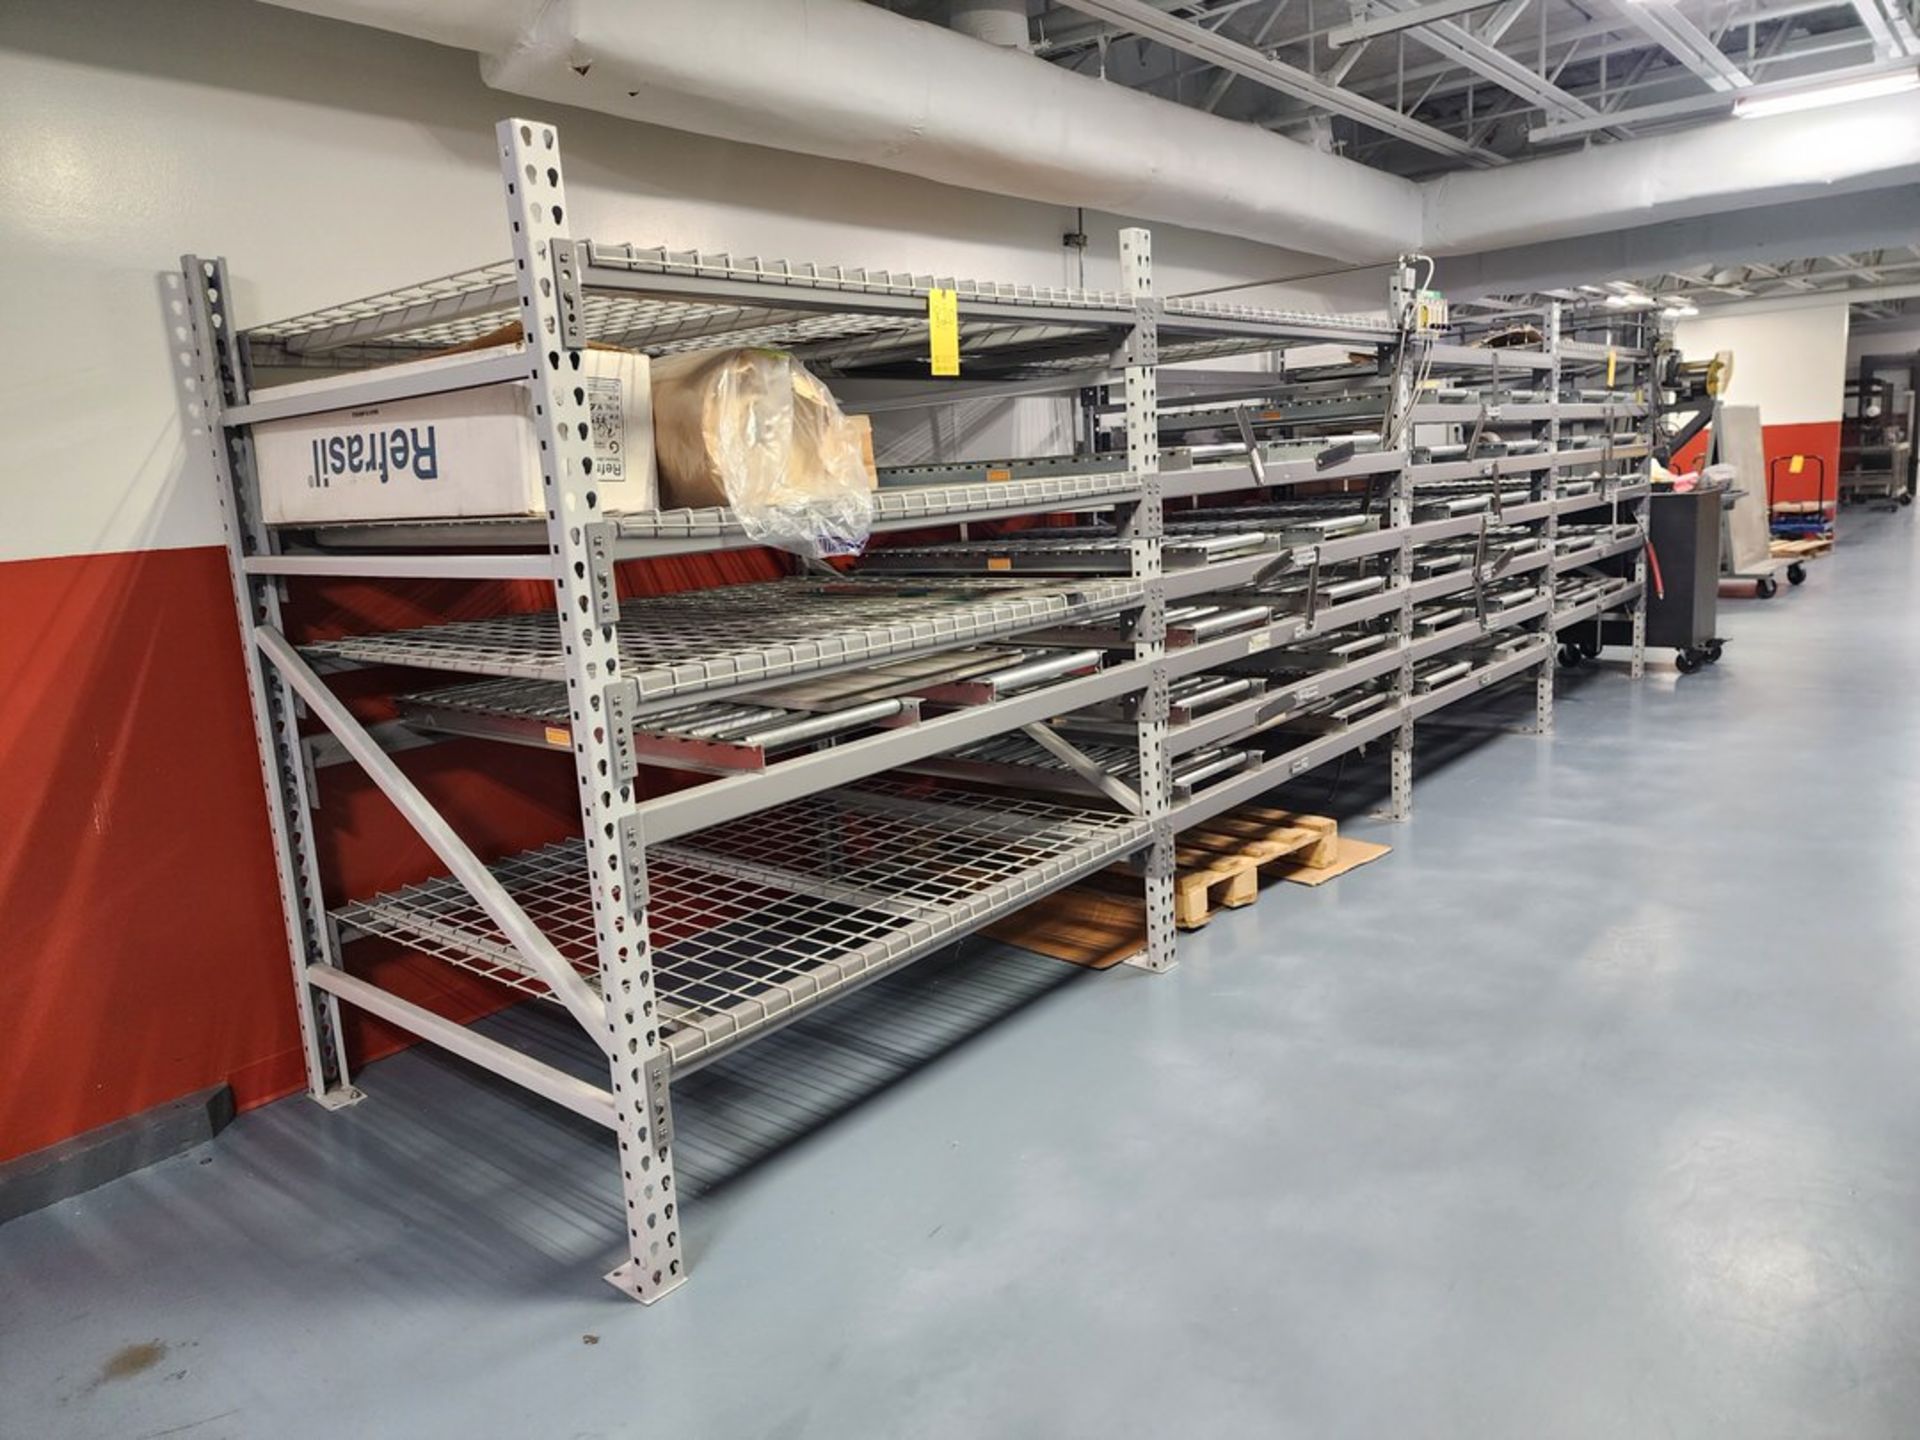 Roller Conveyer Material Rack Unit 252" x 51" x 72"H - Image 3 of 9